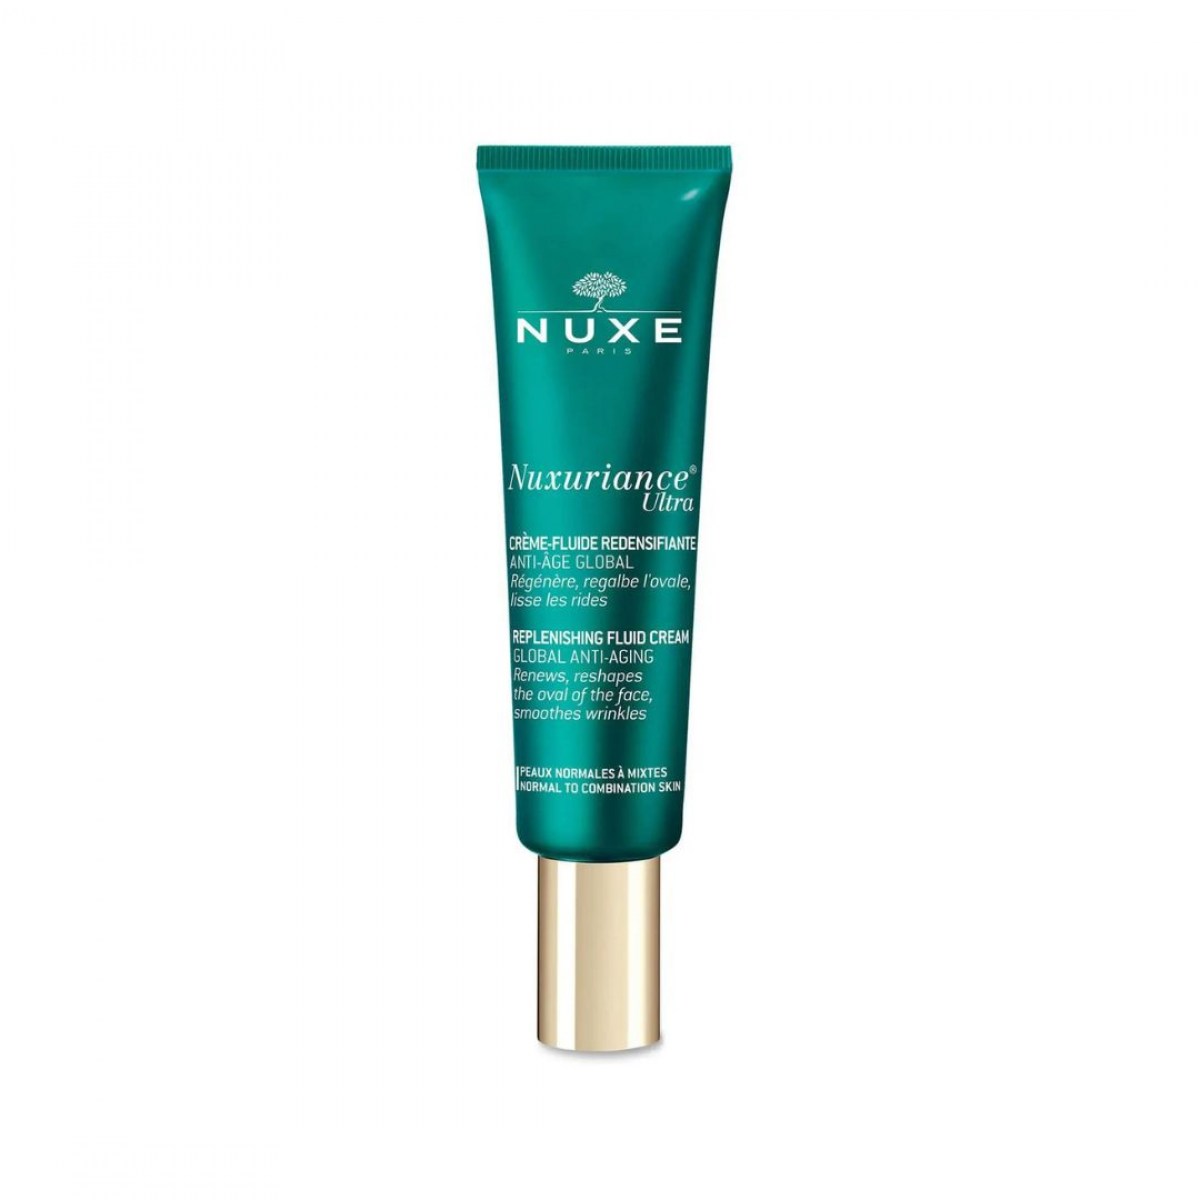 NUXE NUXURIANCE ULTRA FLUIDO REDENSIFICANTE 50ML